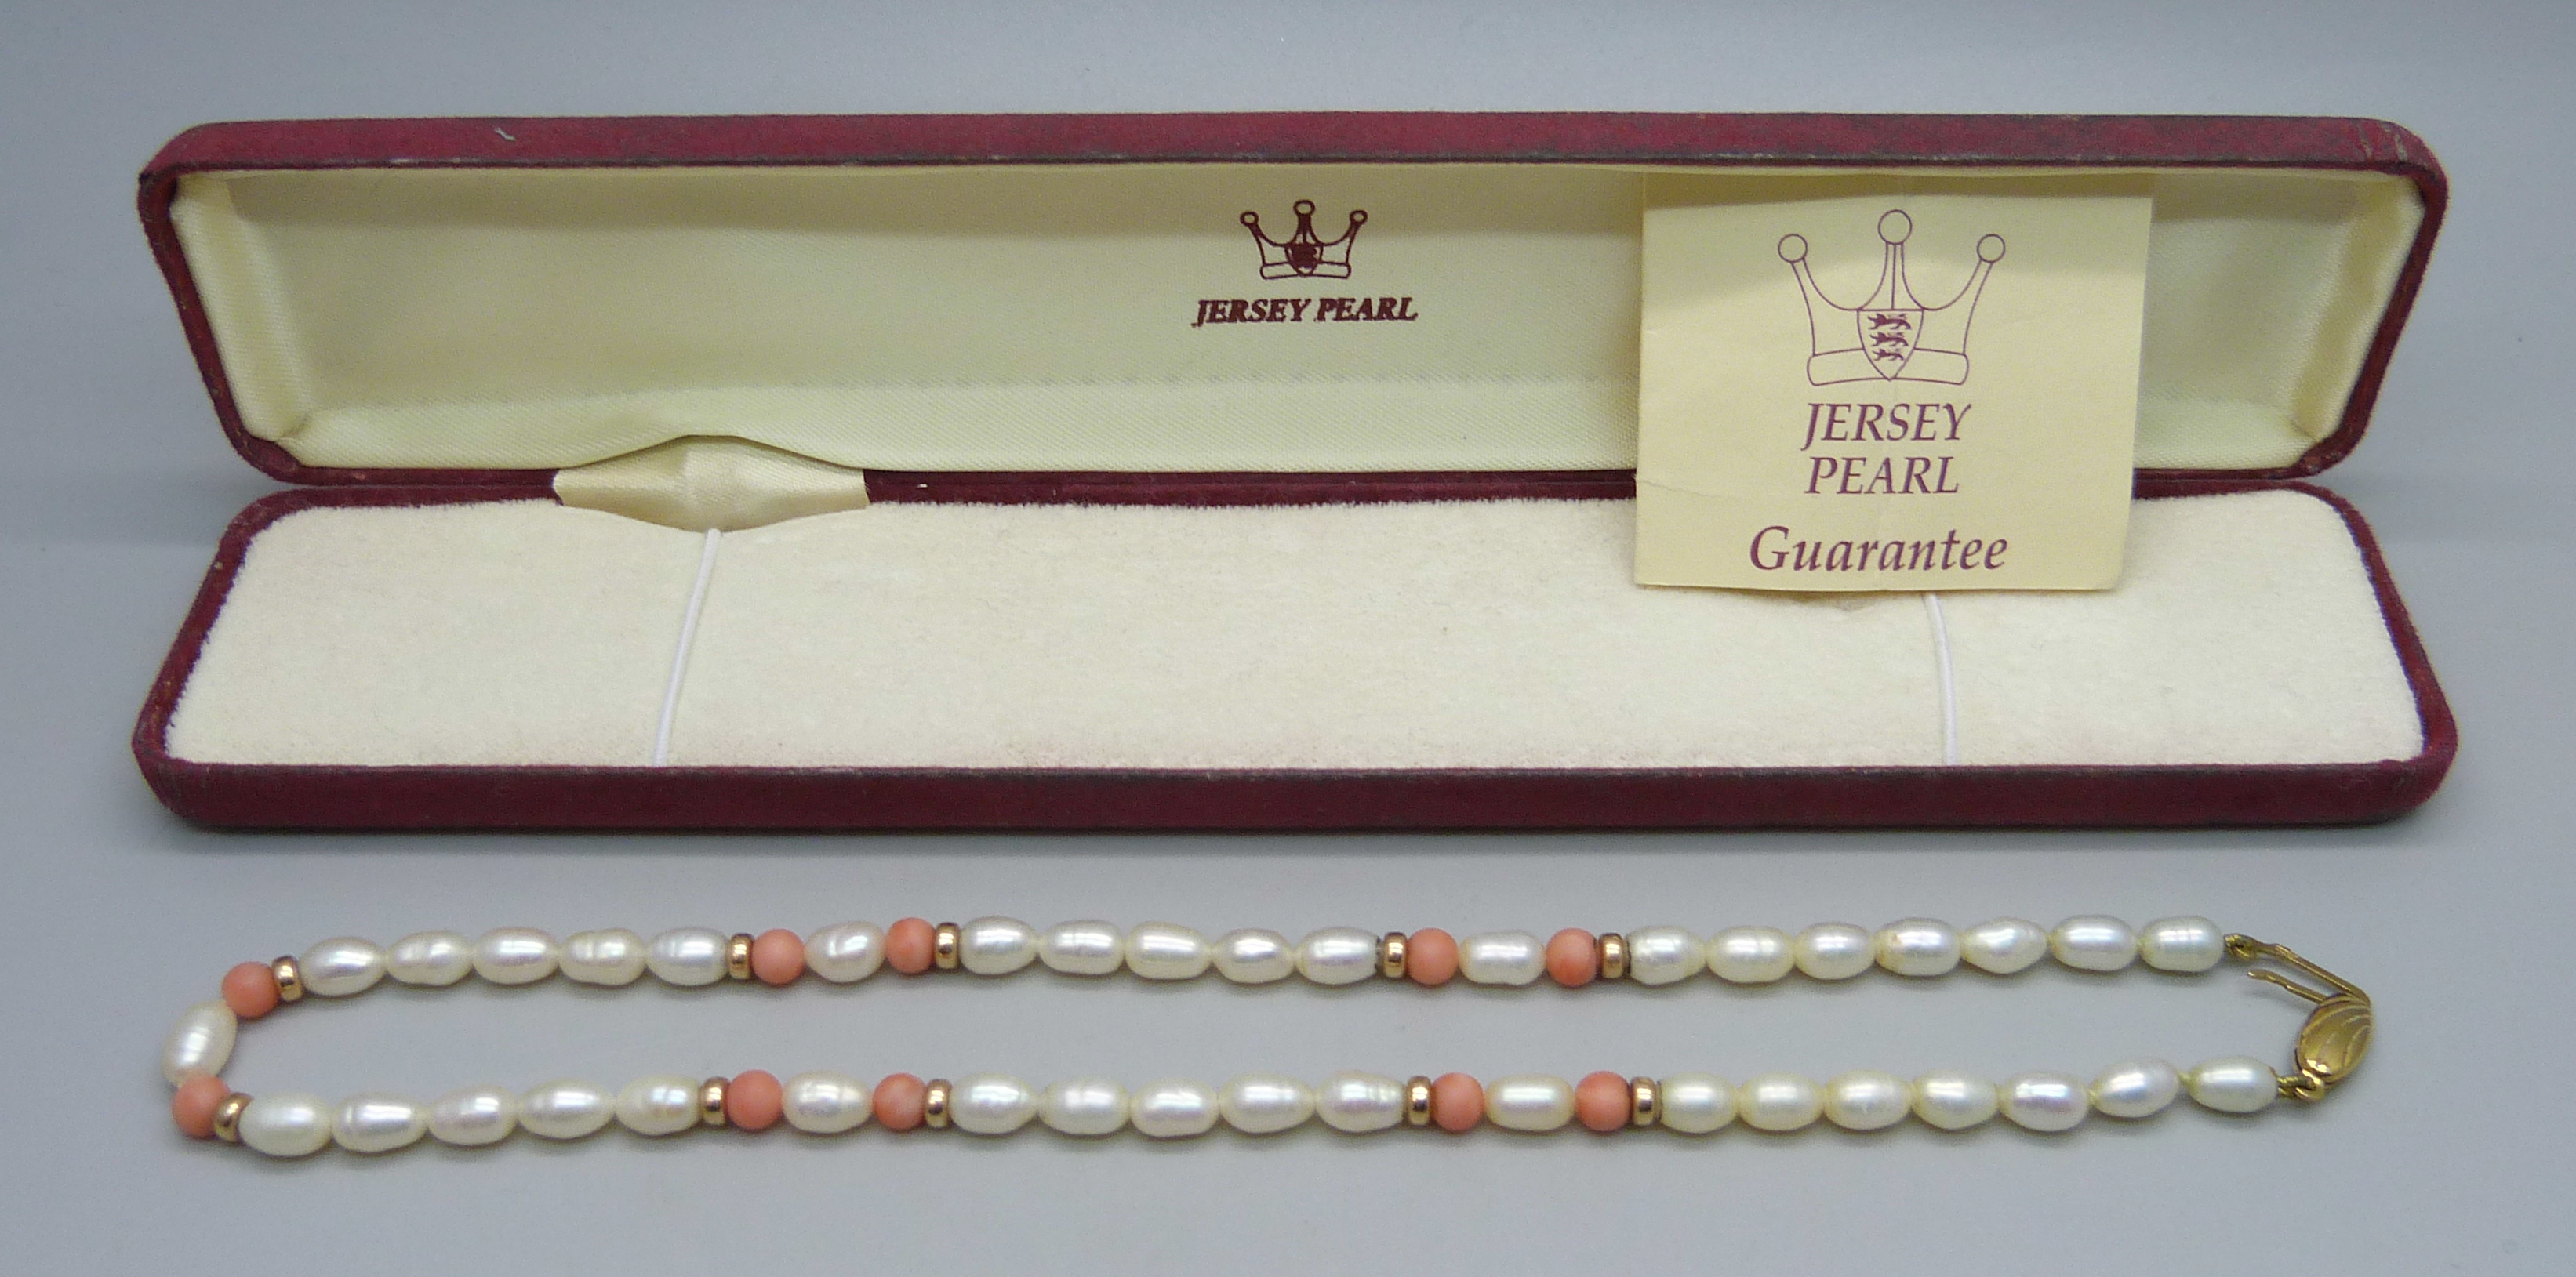 A Jersey Pearl necklace with 9ct gold clasp, boxed